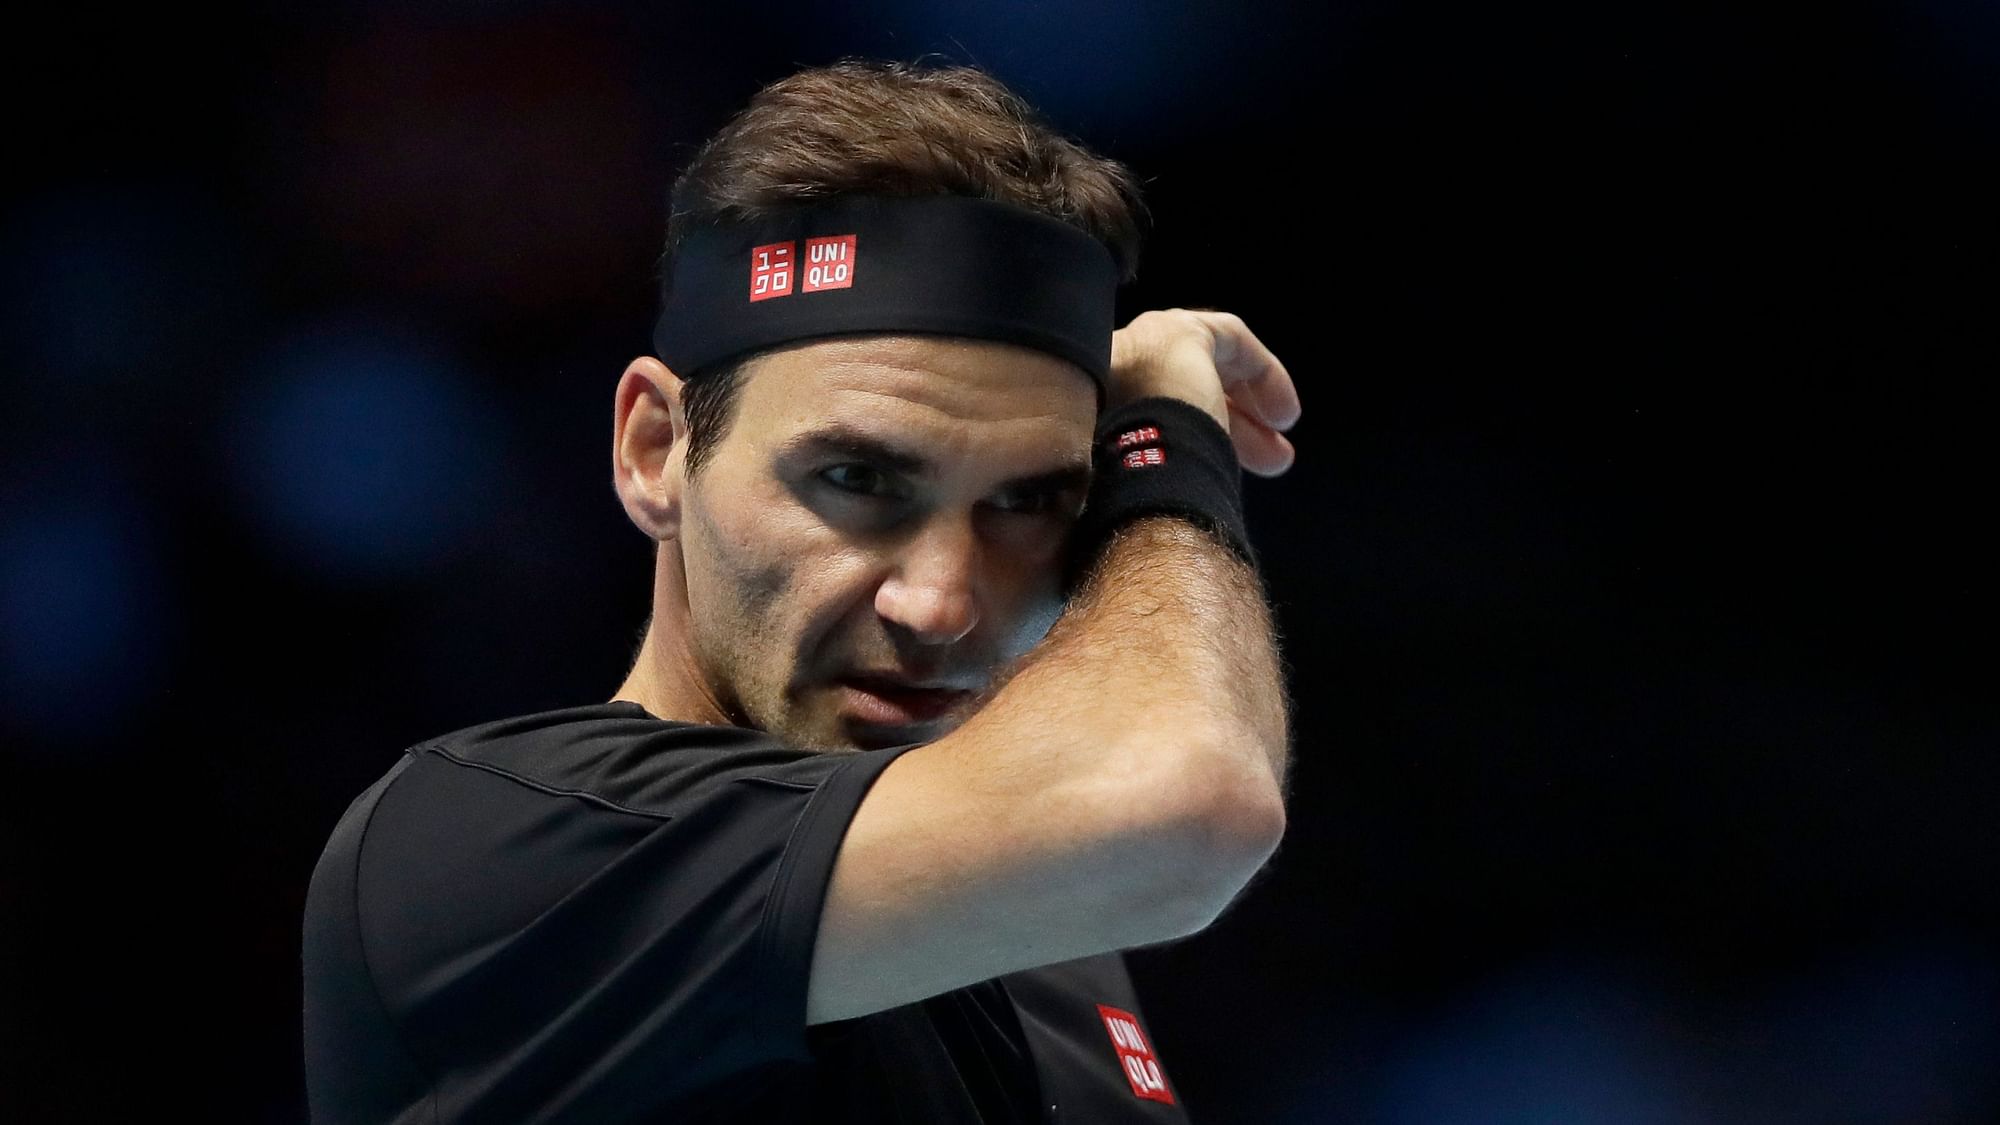 Roger Federer of Switzerland wipes his face after he plays a return to Stefanos Tsitsipas of Greece during their ATP World Tour Finals semifinal tennis match at the O2 Arena in London, Saturday.